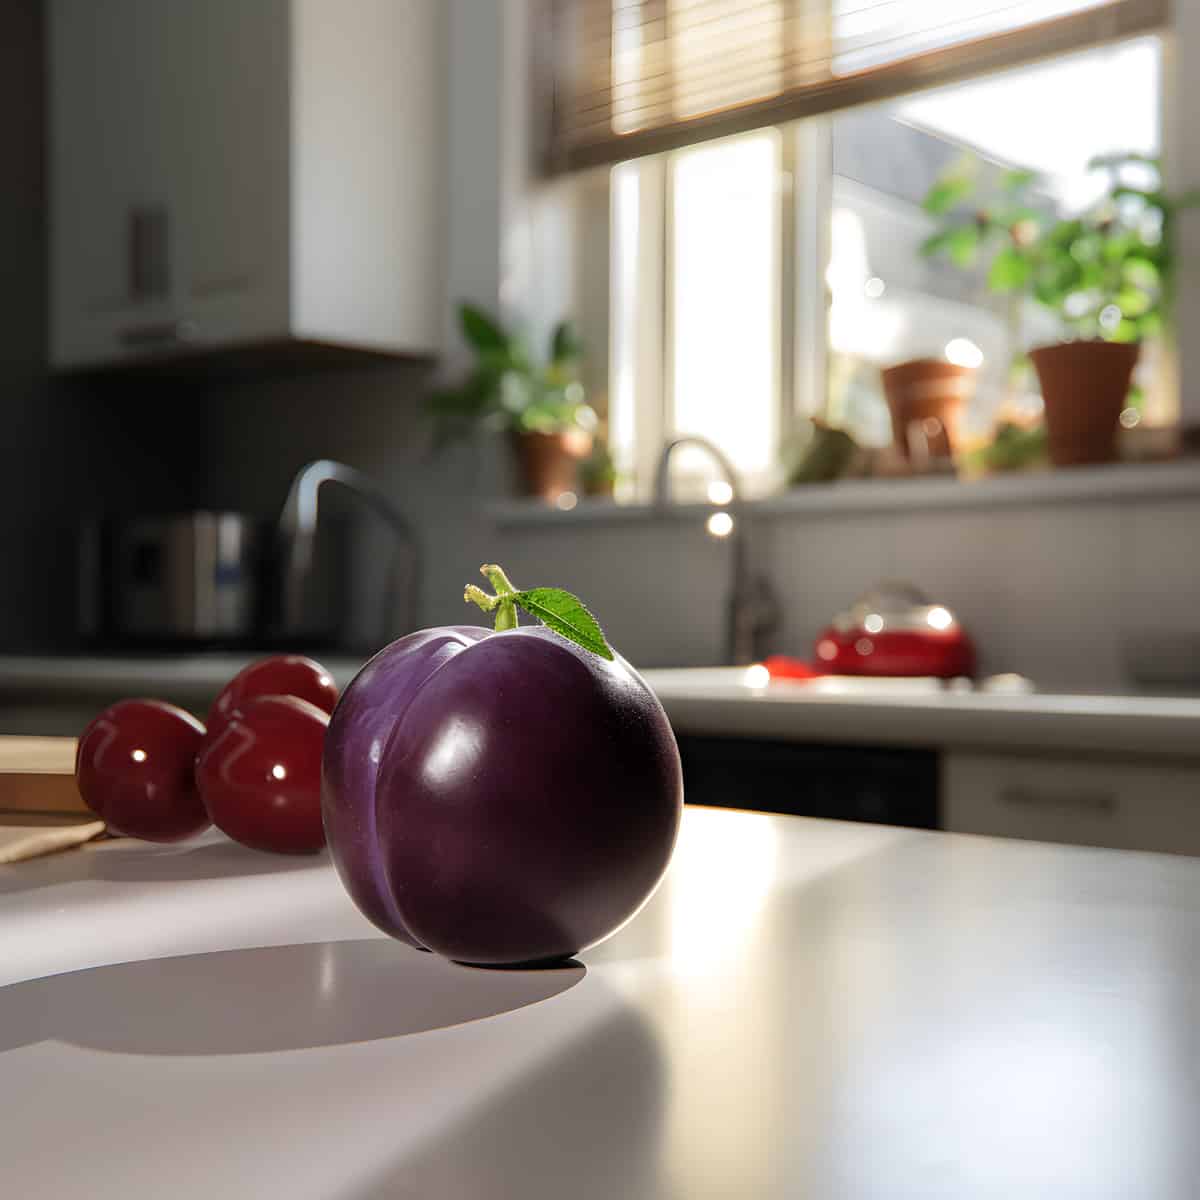 Smooth Davidsons Plum on a kitchen counter